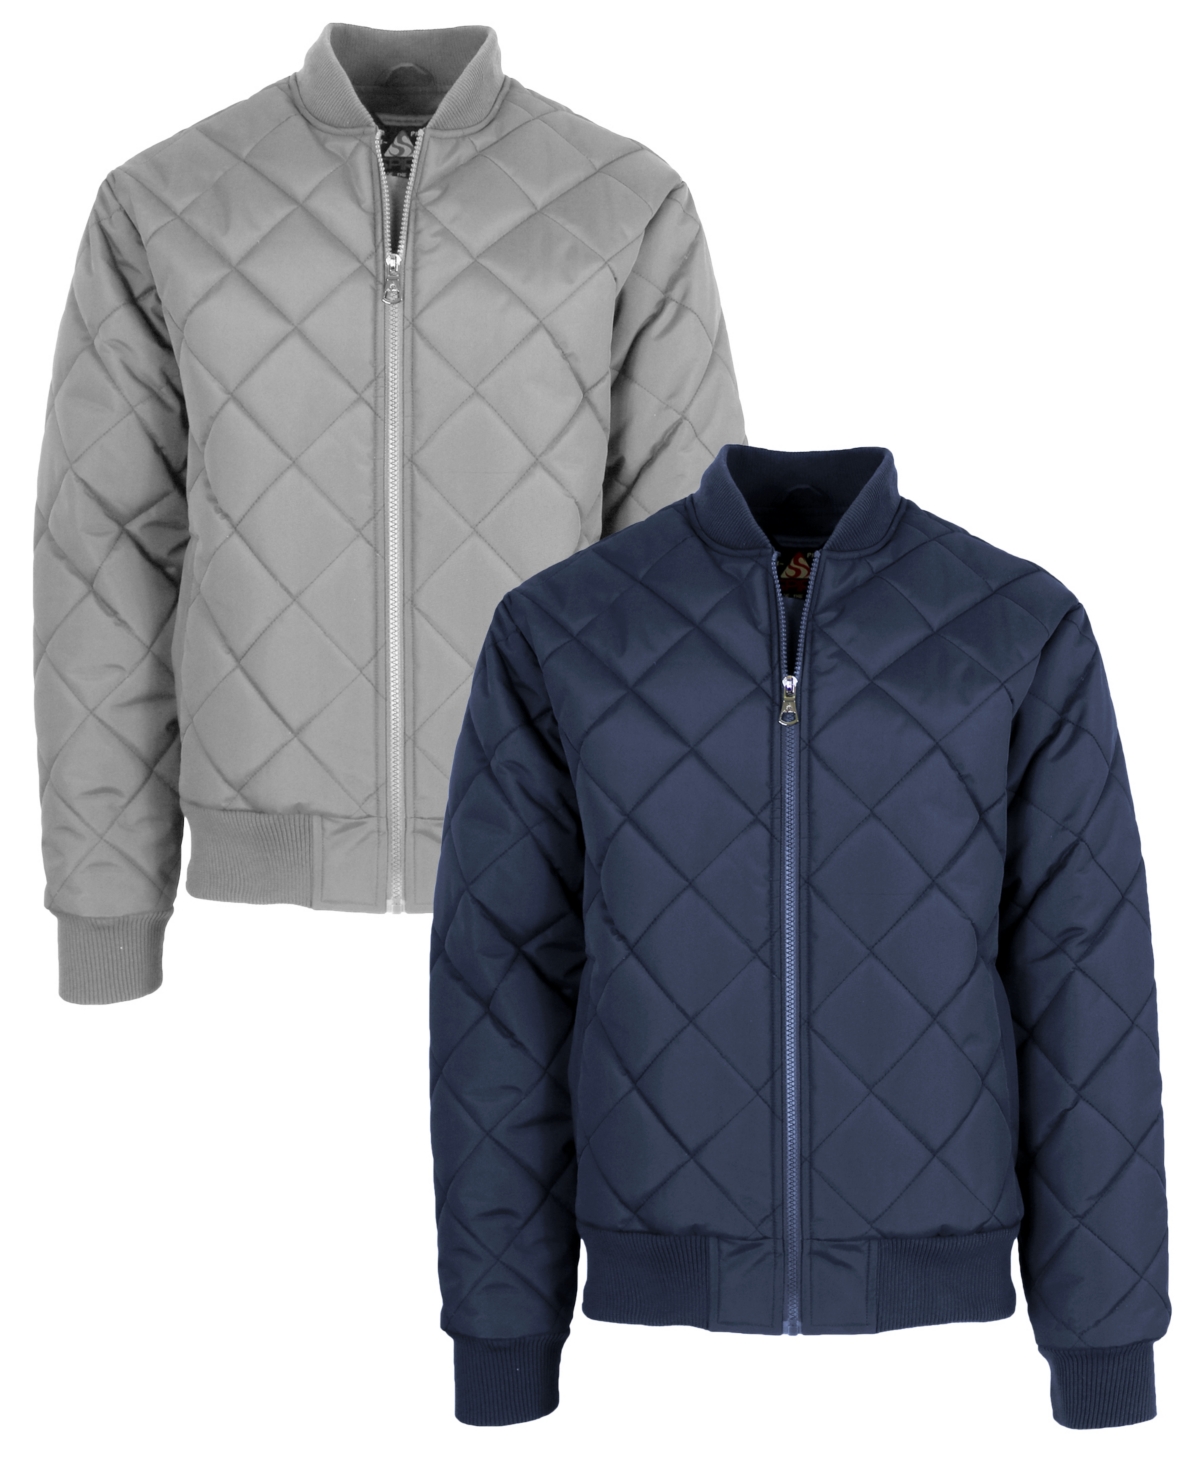 Men's Quilted Bomber Jacket, Pack of 2 - Navy-Olive